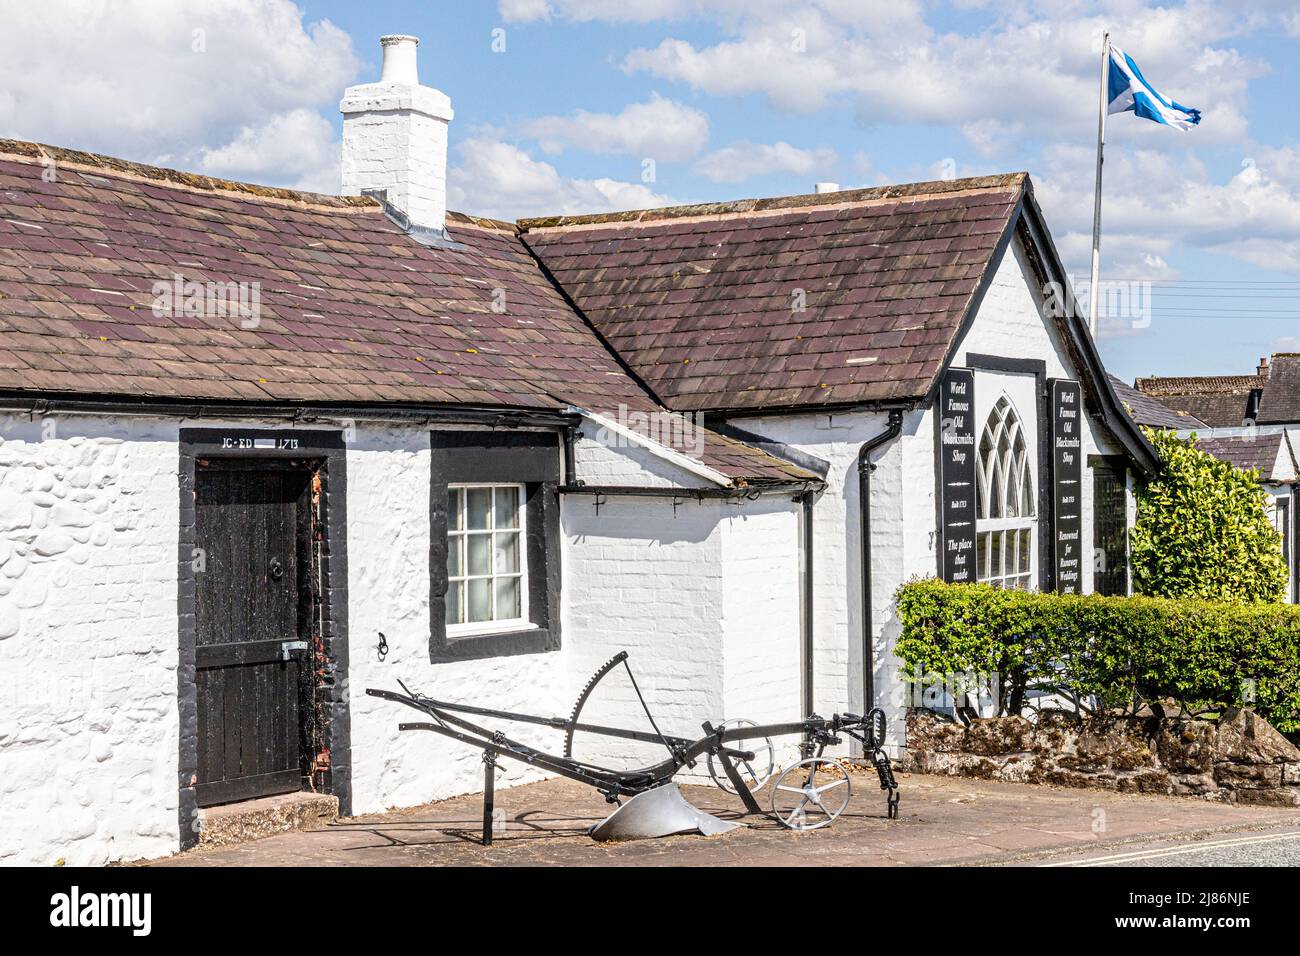 The world famous Old Blacksmiths Shop, home of the anvil wedding, at Gretna Green, Dumfries & Galloway, Scotland UK Stock Photo